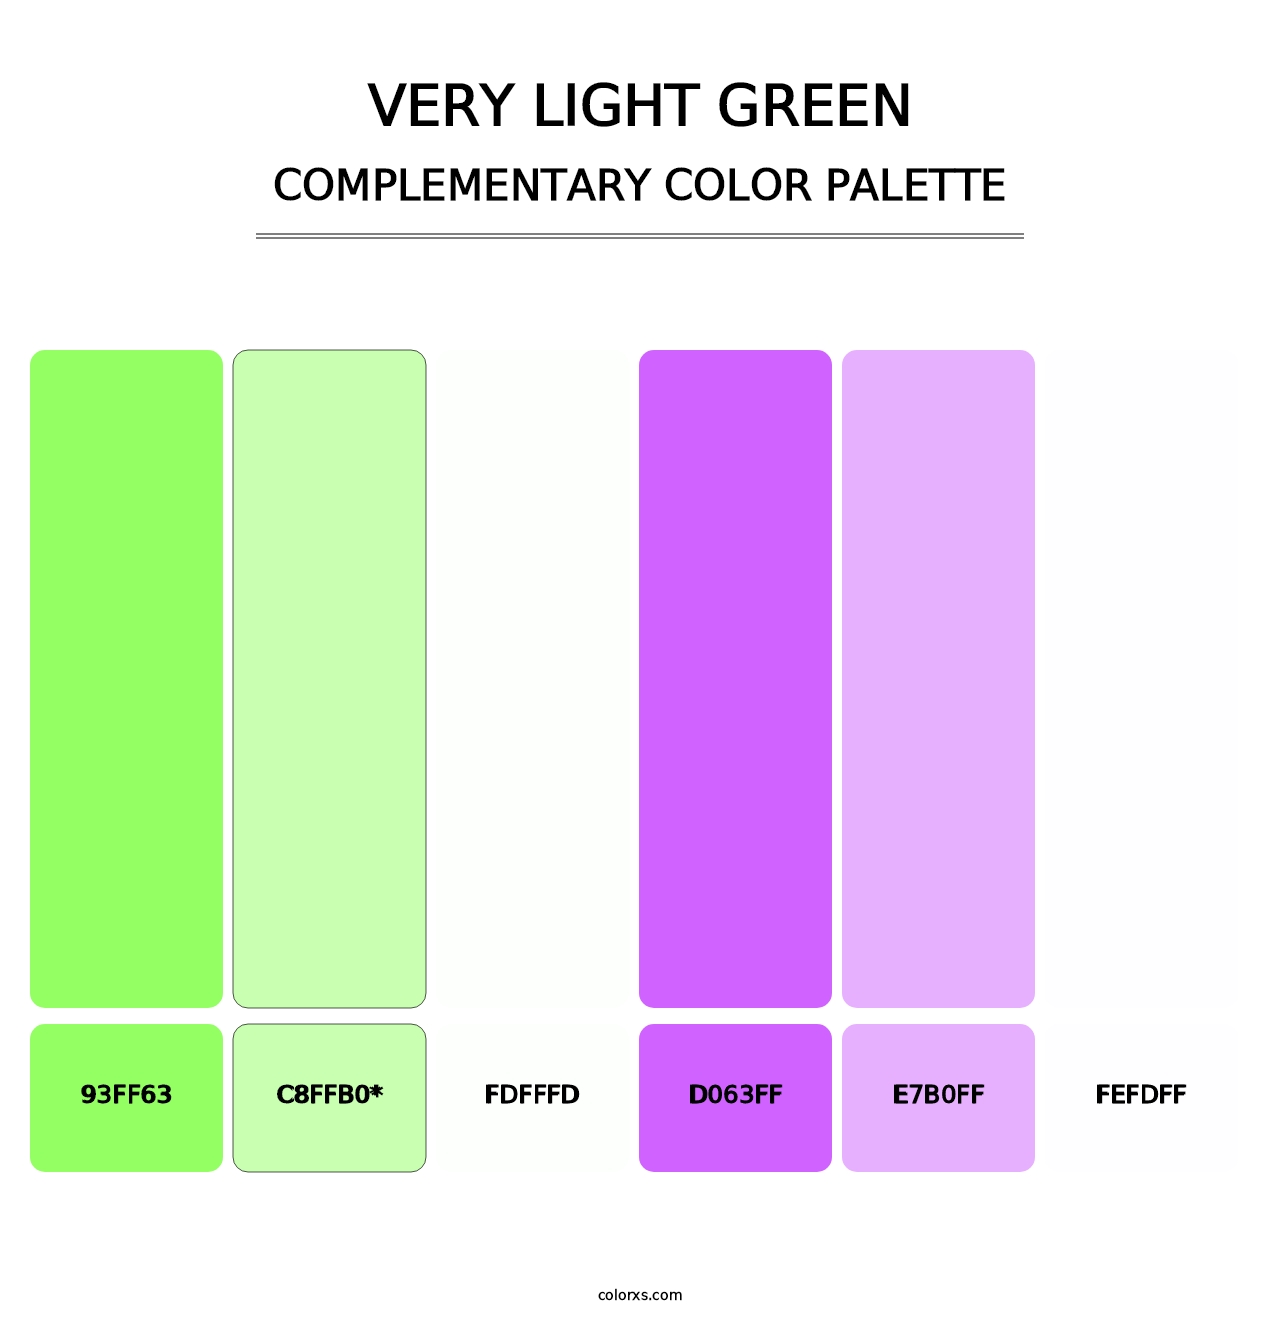 Very Light Green - Complementary Color Palette